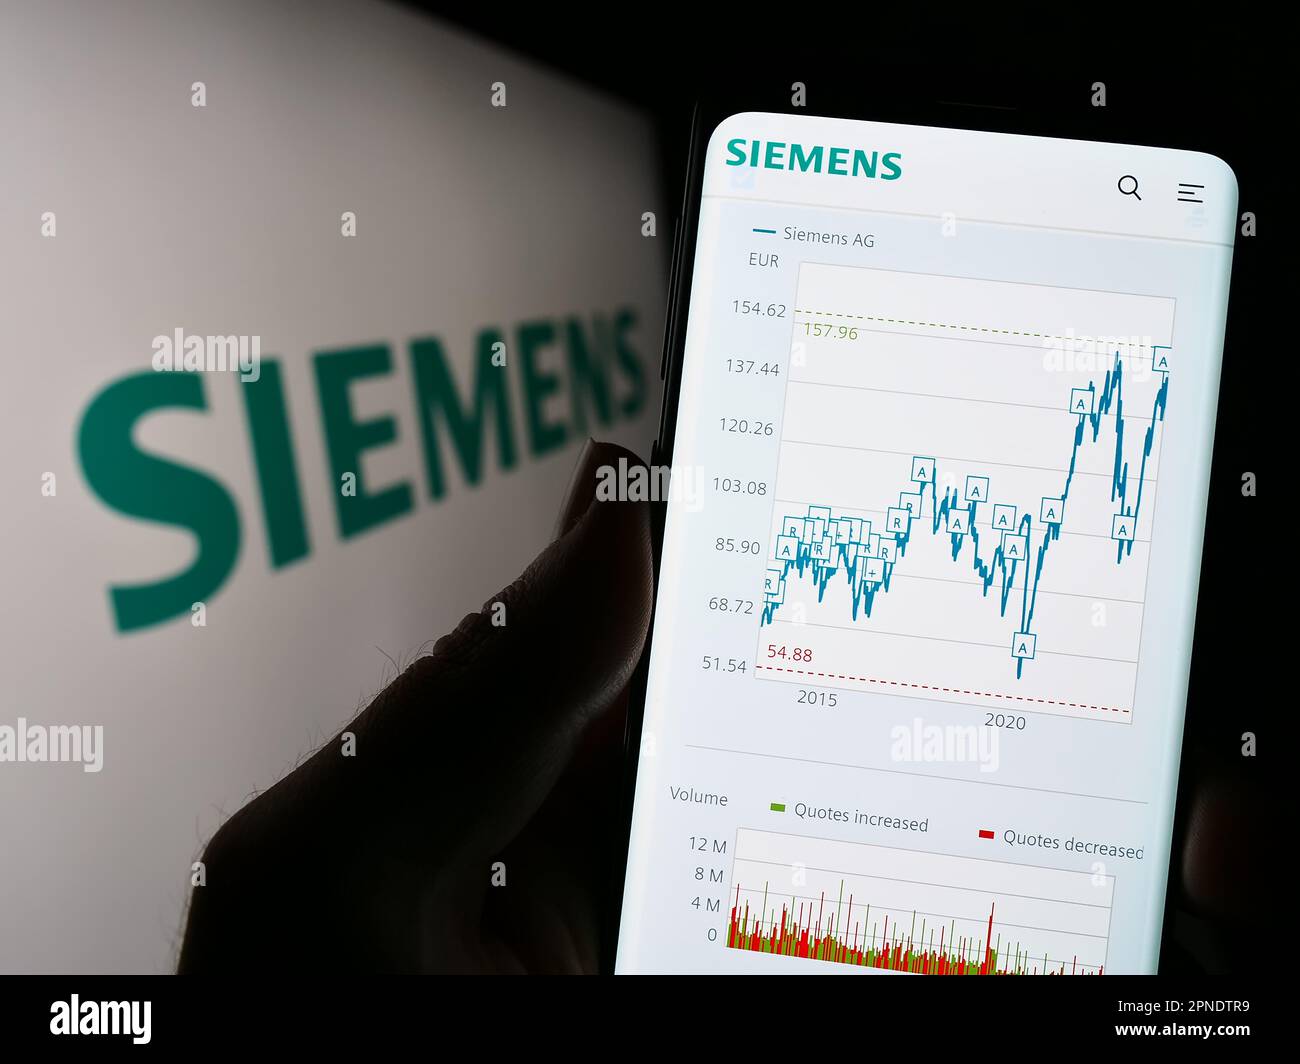 Person holding cellphone with webpage of German conglomerate Siemens AG on screen in front of business logo. Focus on center of phone display. Stock Photo